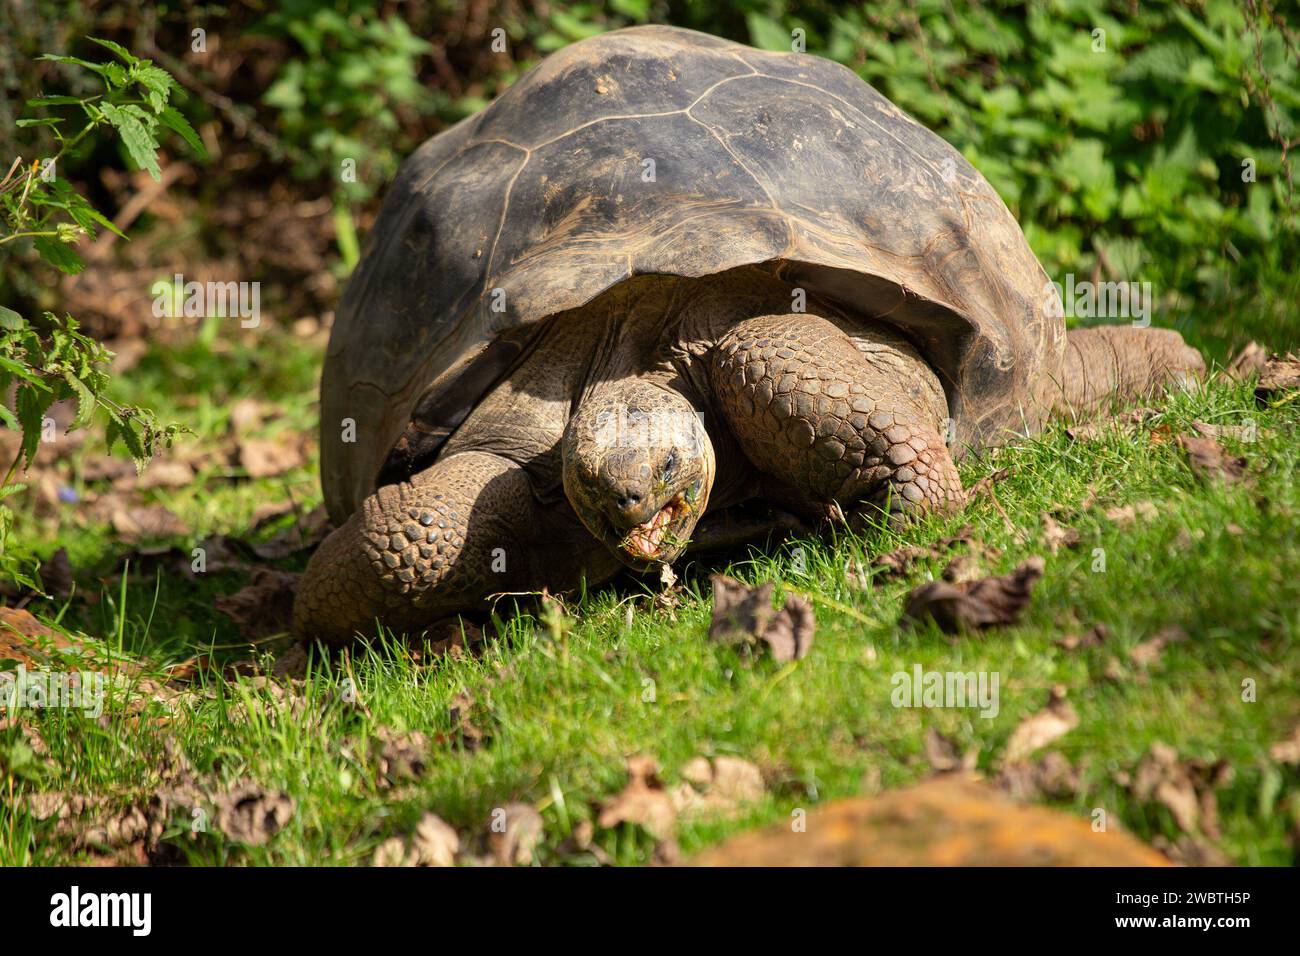 The Galapagos Giant Tortoise, an iconic inhabitant of the archipelago, roams with timeless grace. With a majestic presence, this ancient mariner symbo Stock Photo